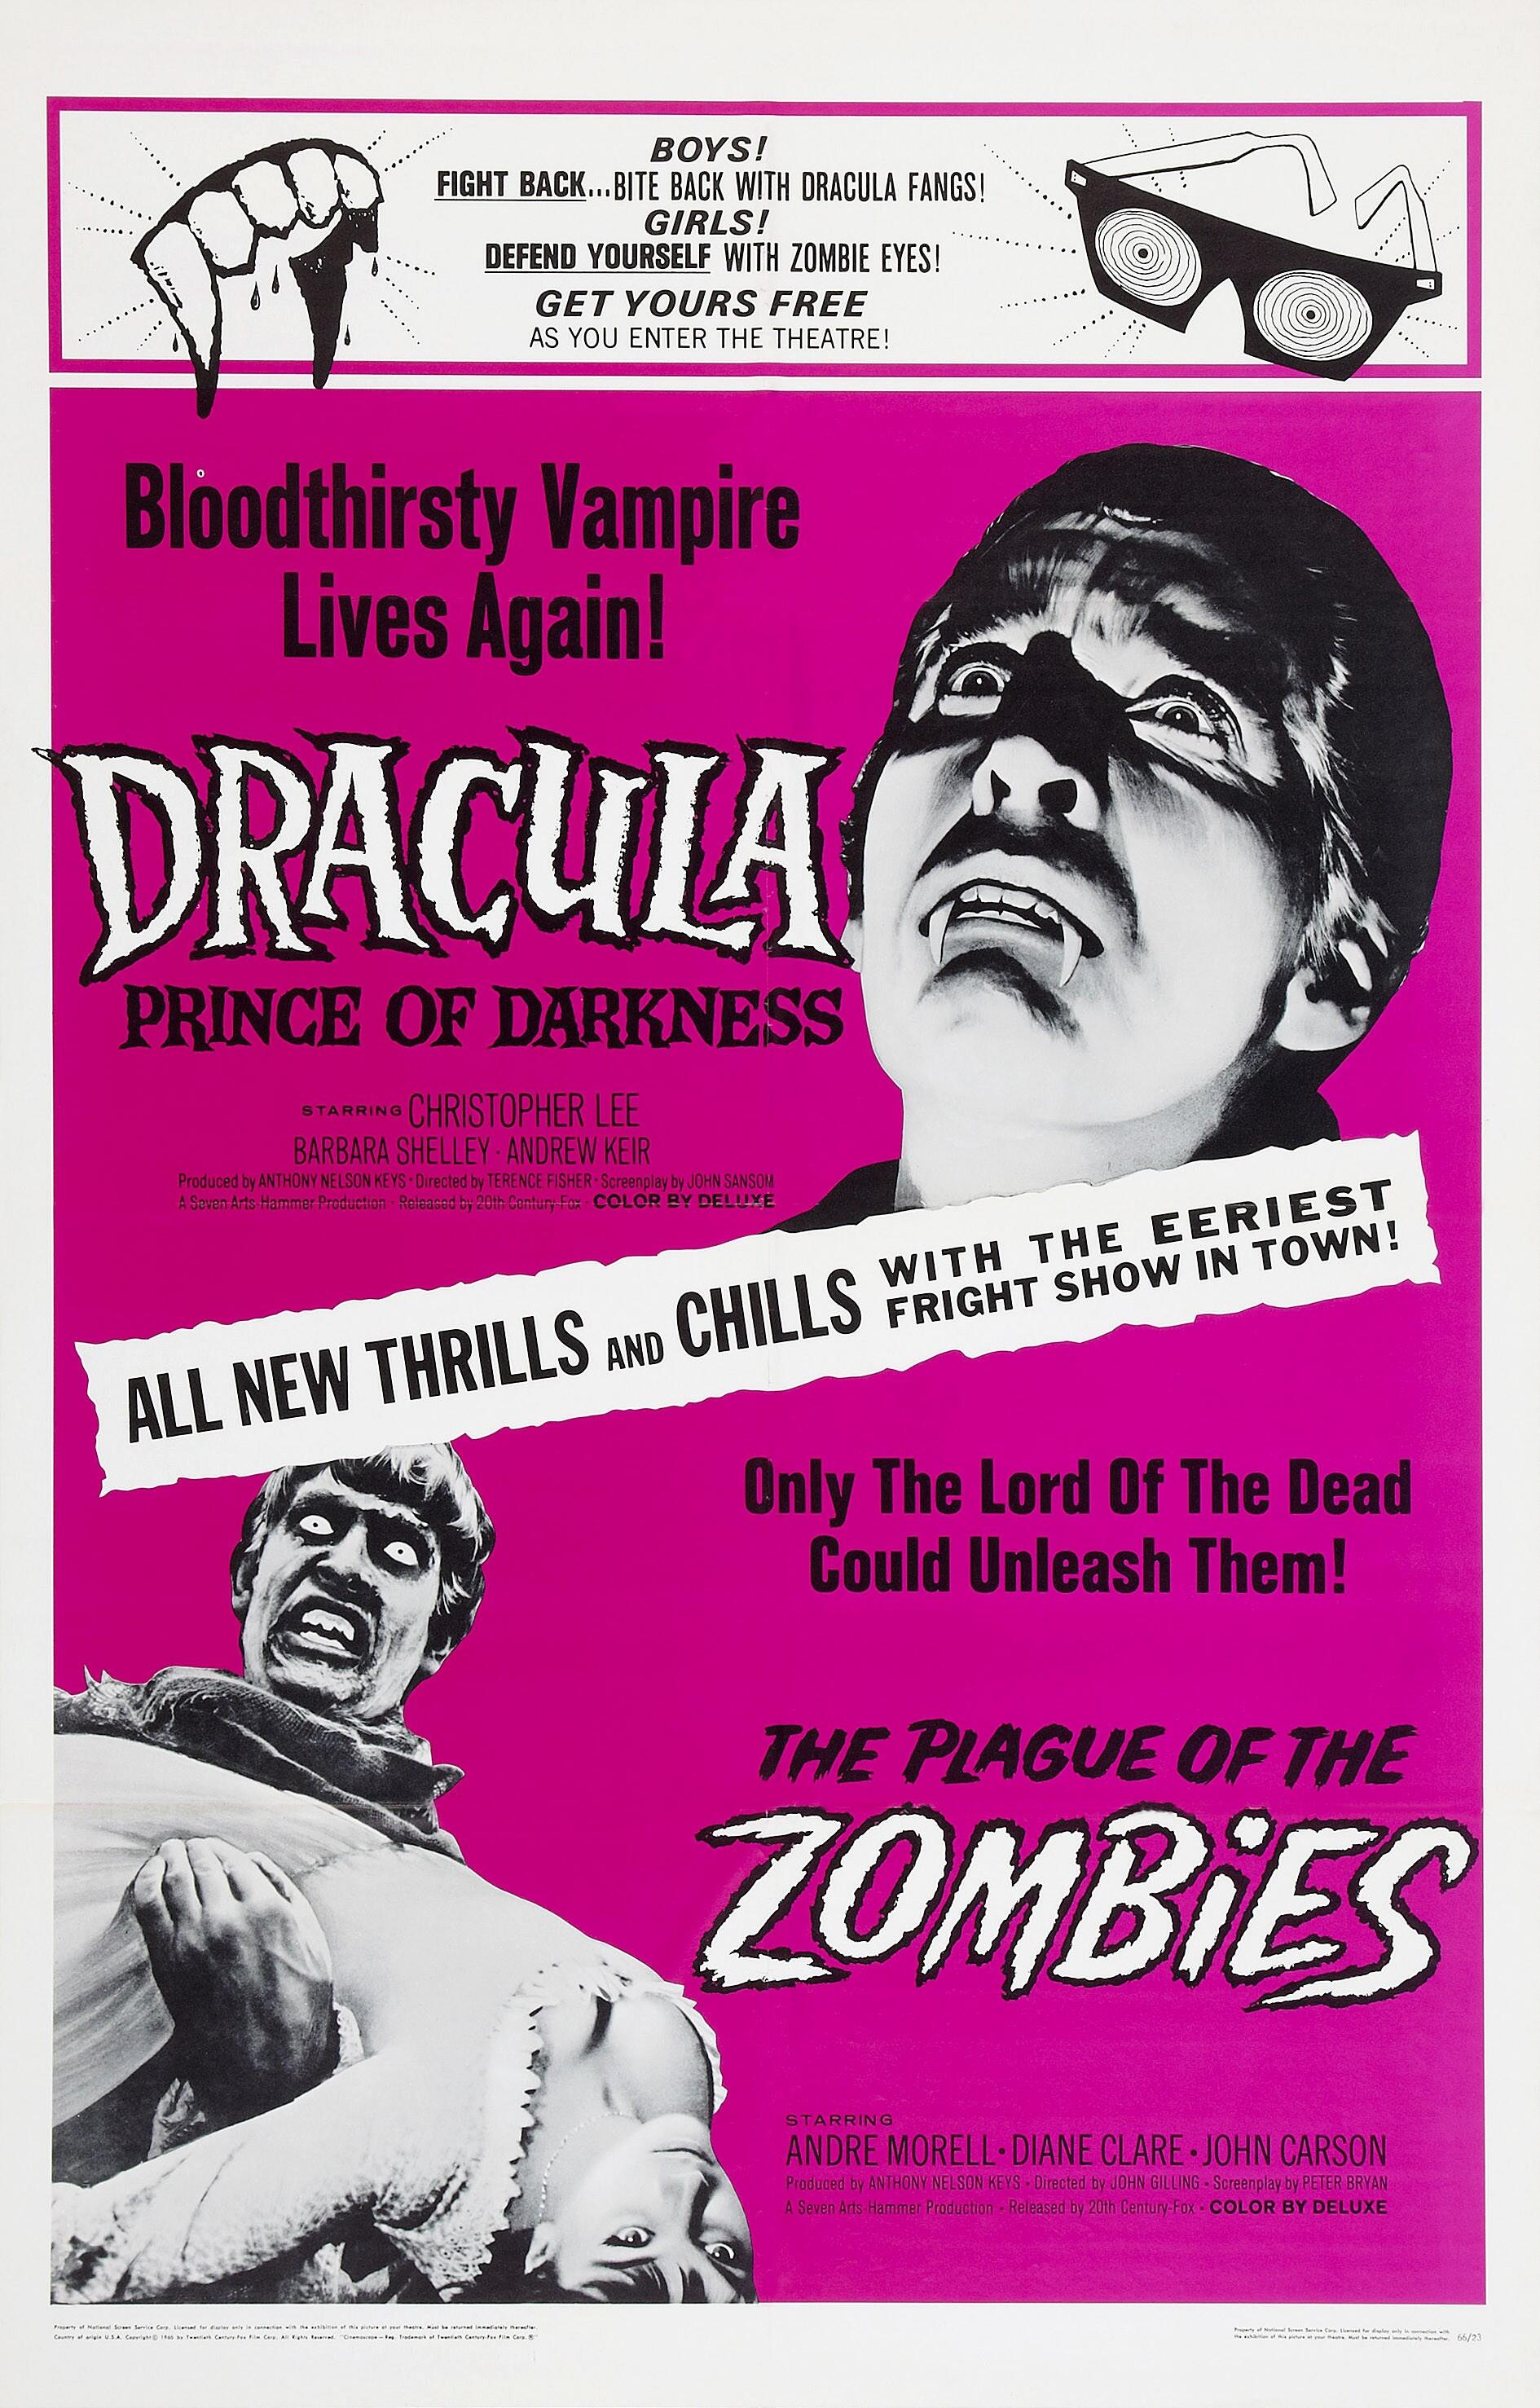 The Craziest Vampire Movie Posters You've Probably Never Seen